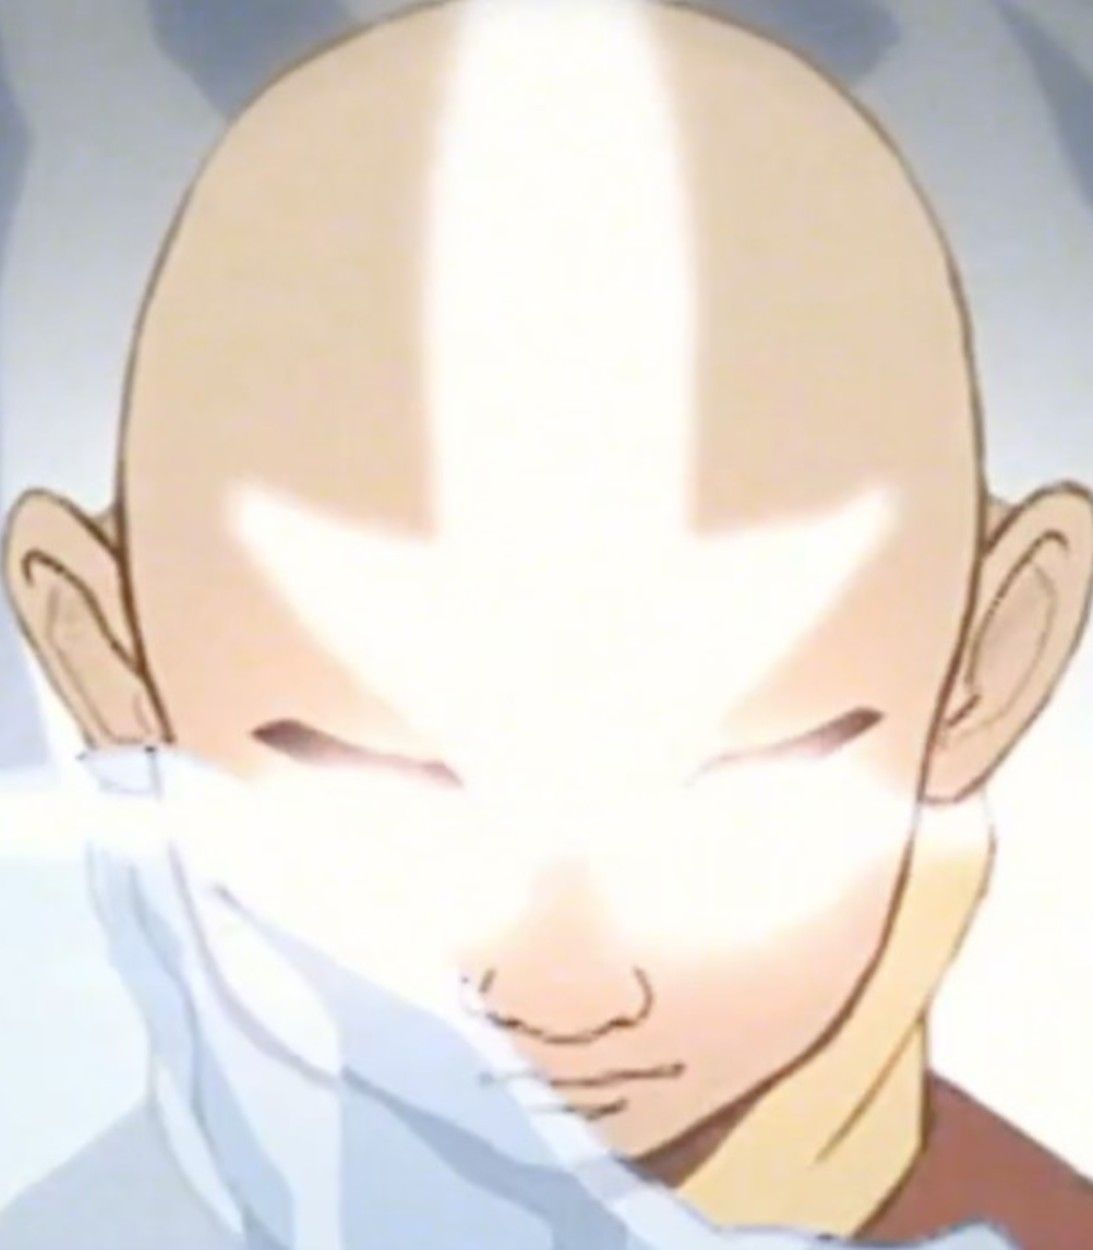 Avatar State Aang pic vertical